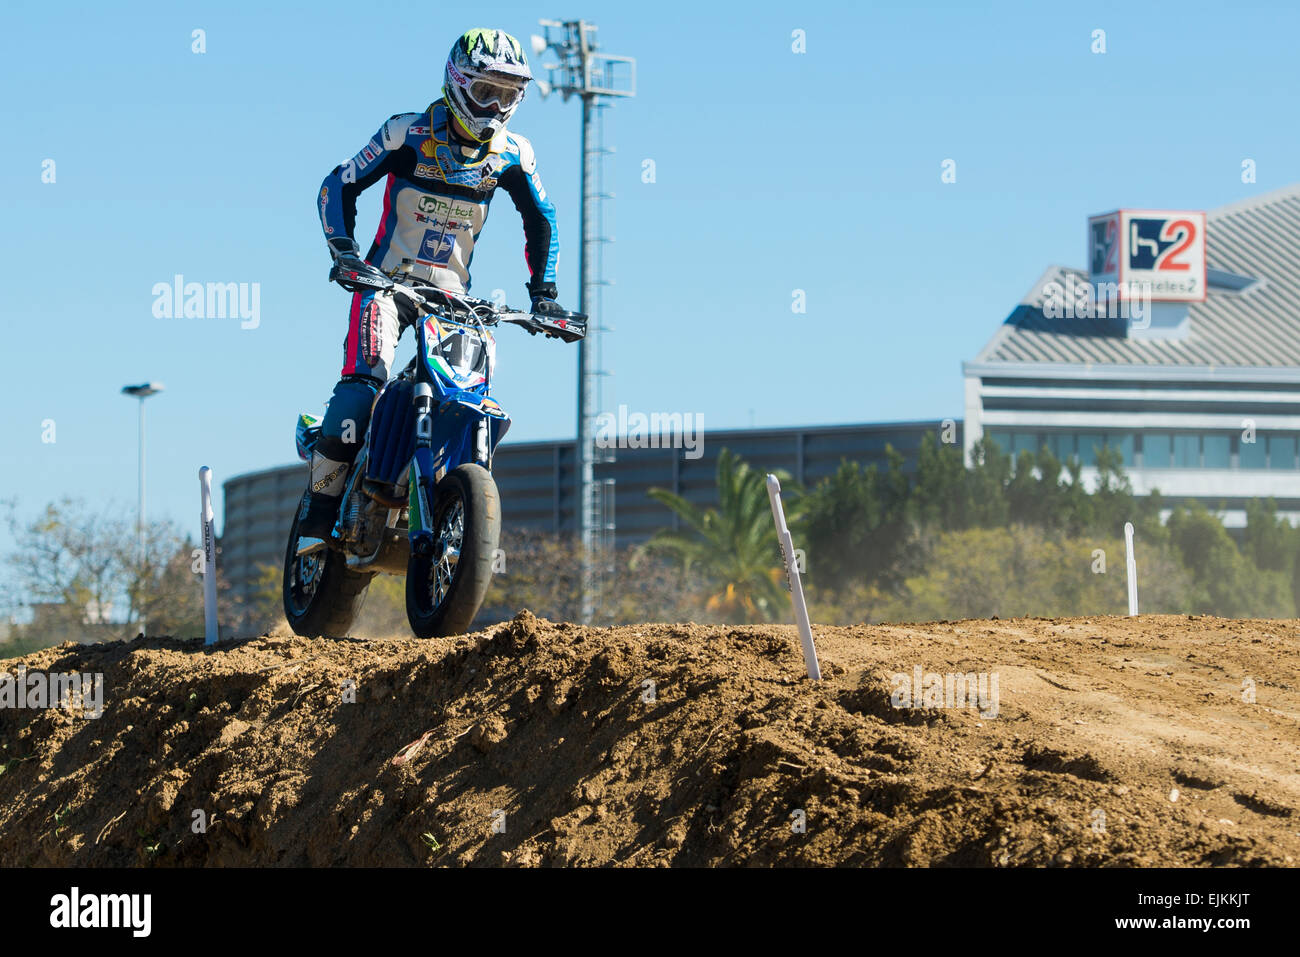 Jerez de la Frontera, Andalusia, Spain, 28 March, 2015: Marc Reiner Schmidt  in qualifying session of first Grand Prix of the FIM S2 European  Championship Stock Photo - Alamy